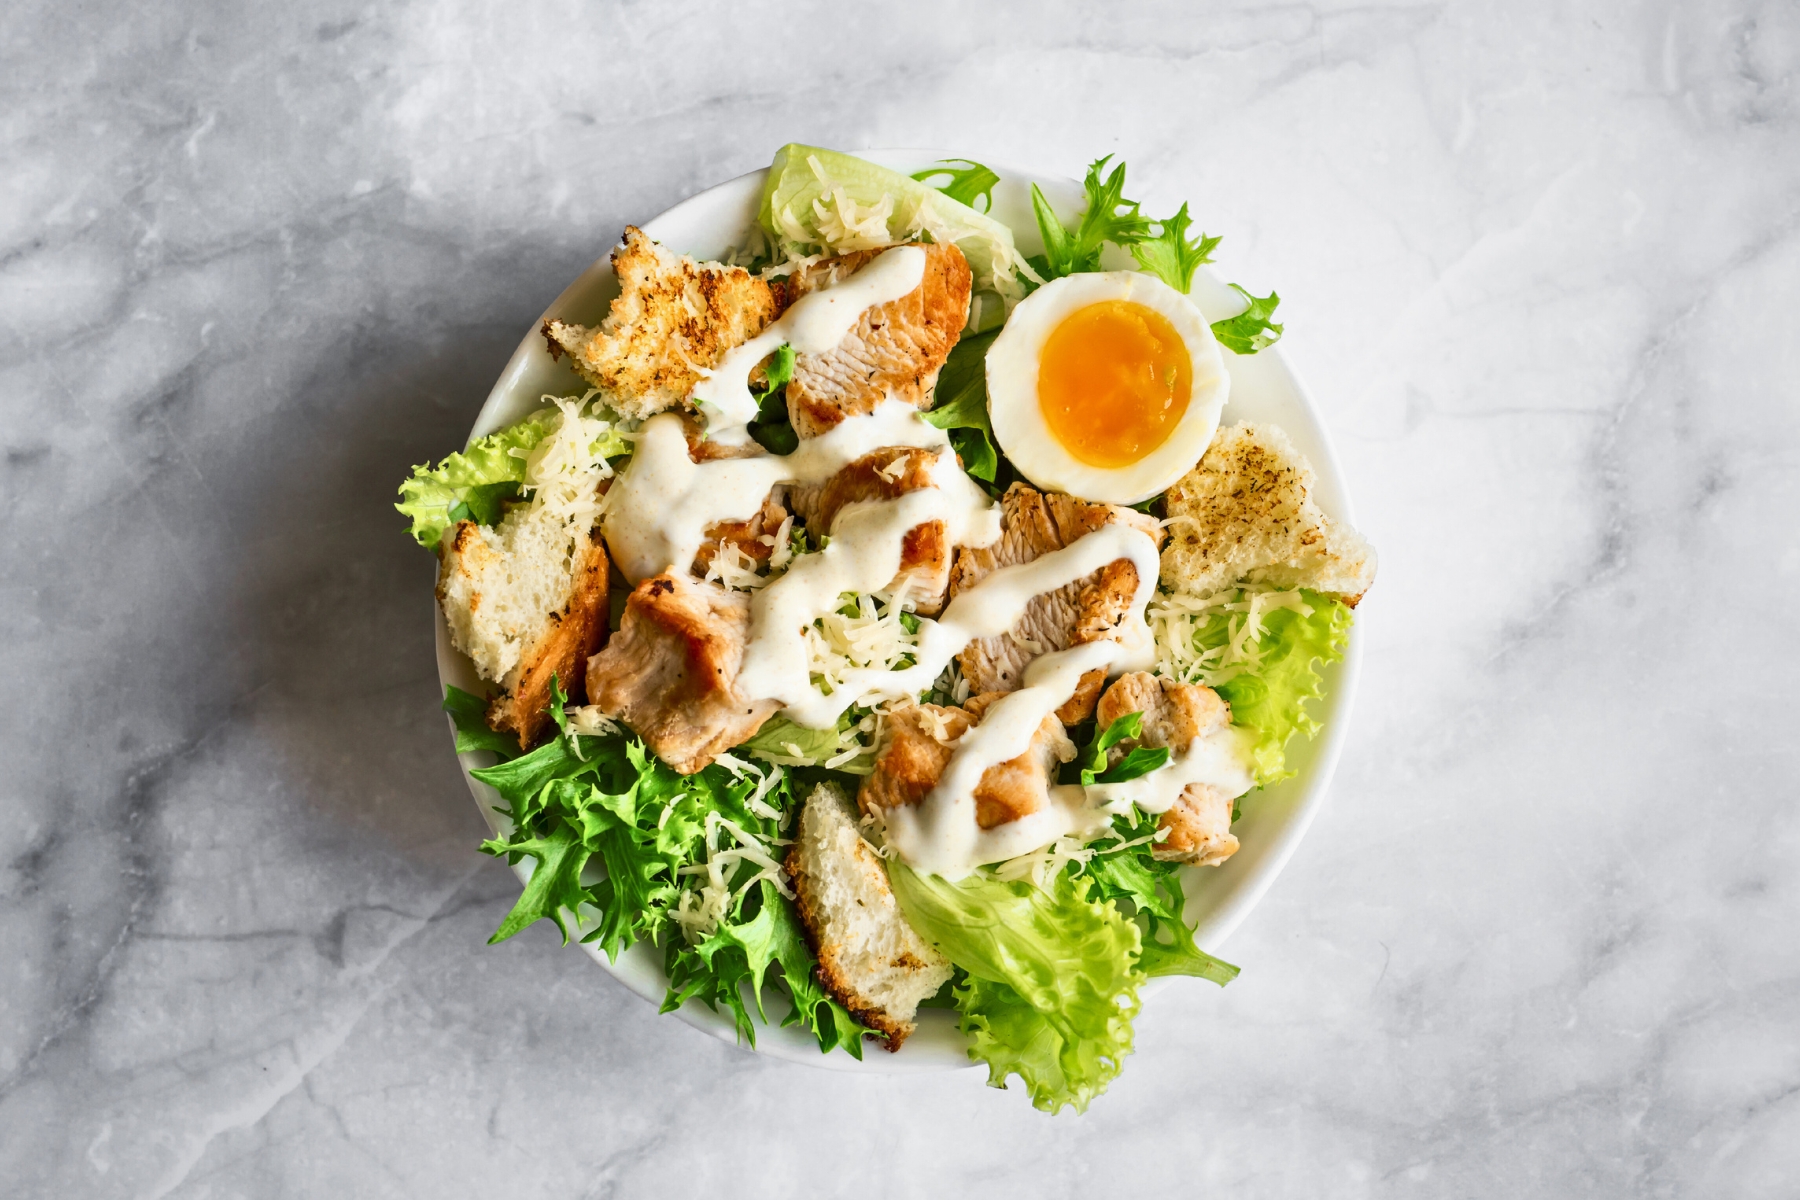 Green salad topped with chunky croutons, half a soft boiled egg and a drizzle of creamy white dressing over top.